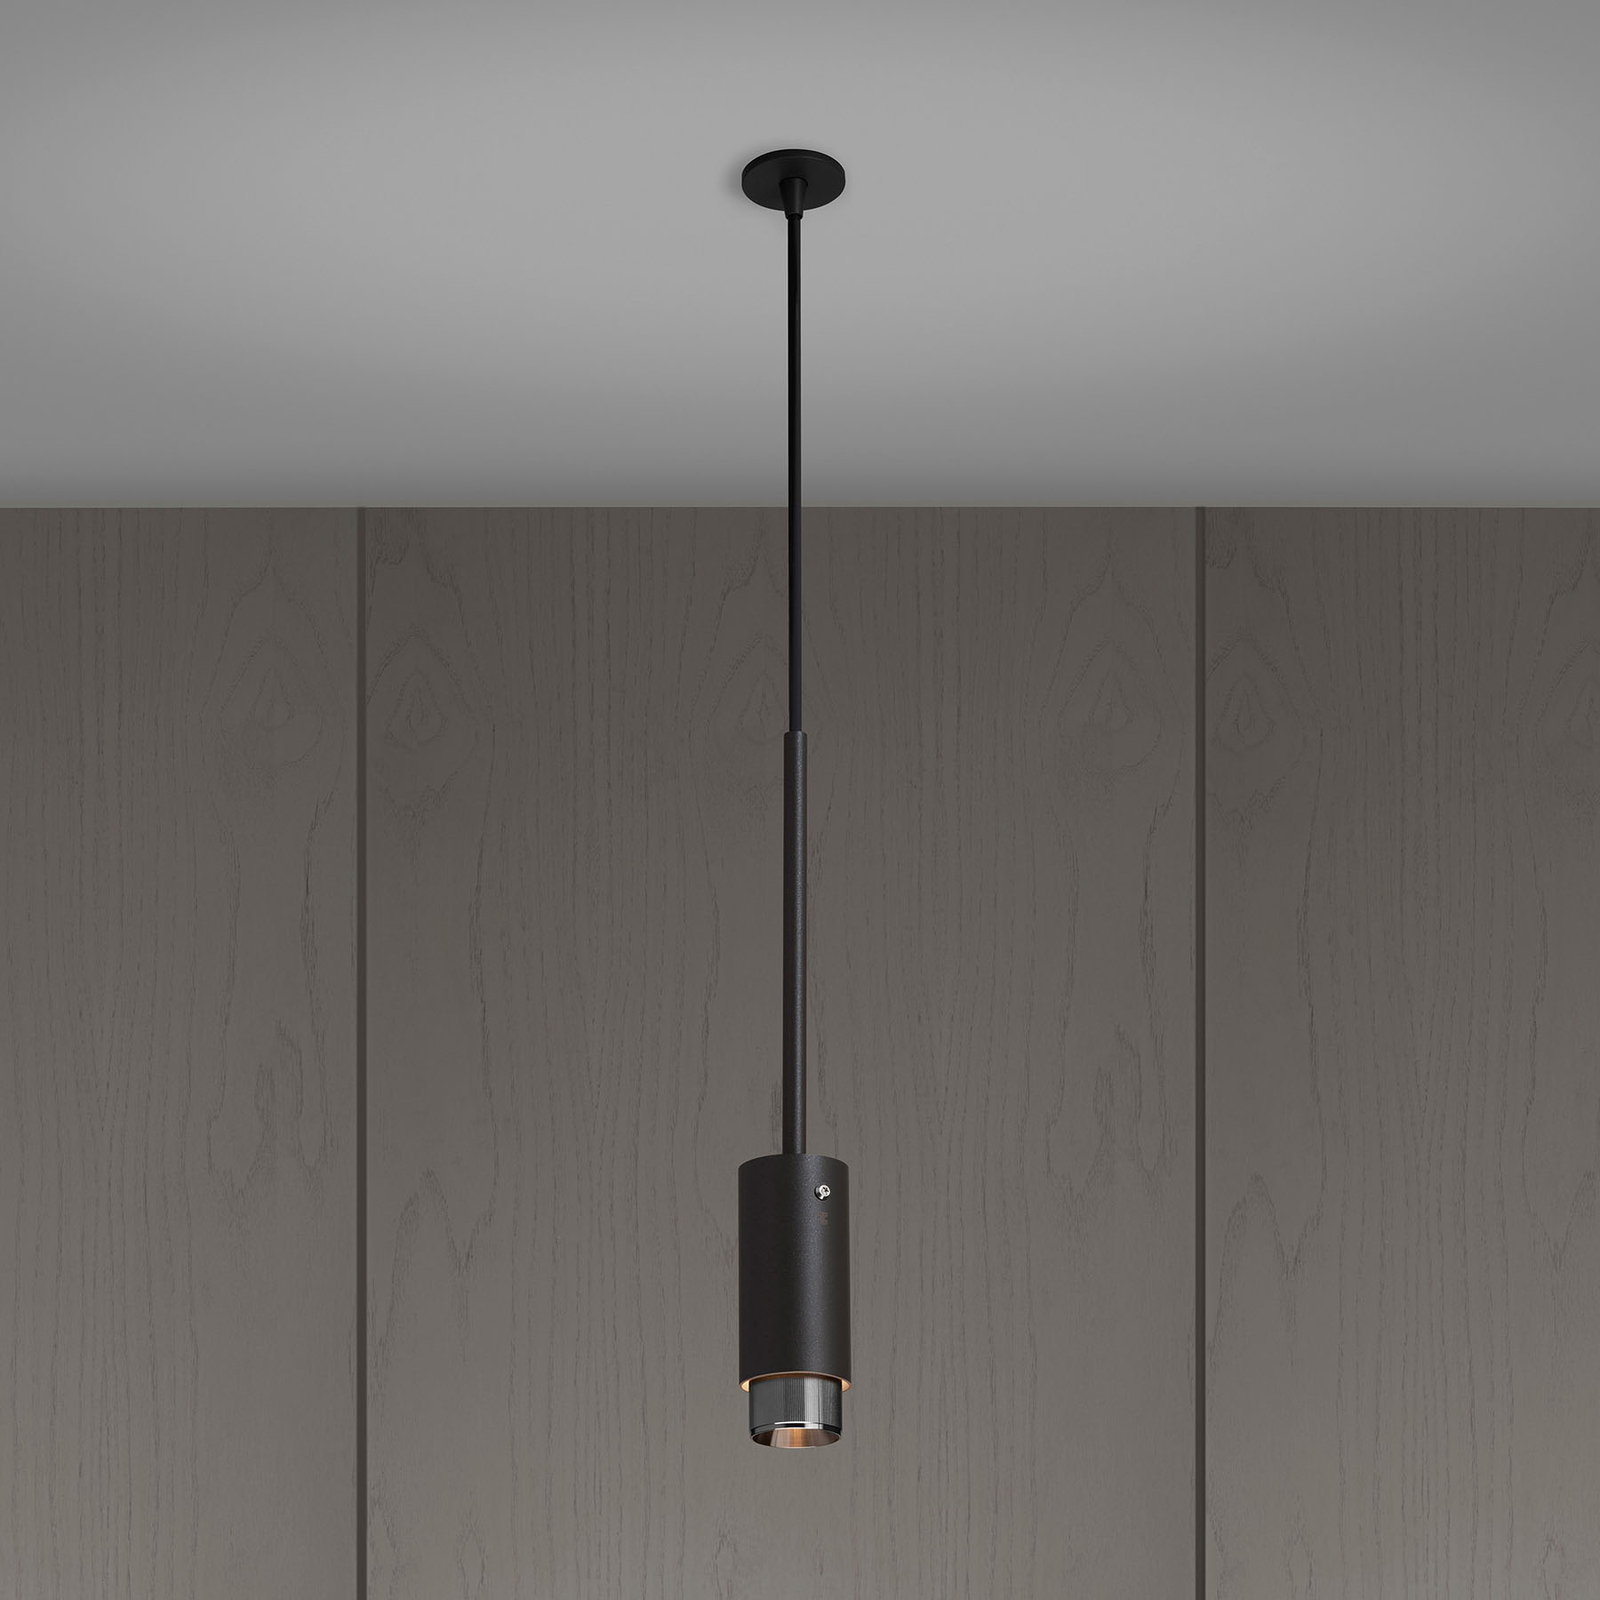 Buster + Punch Exhaust hanging graphite/steel